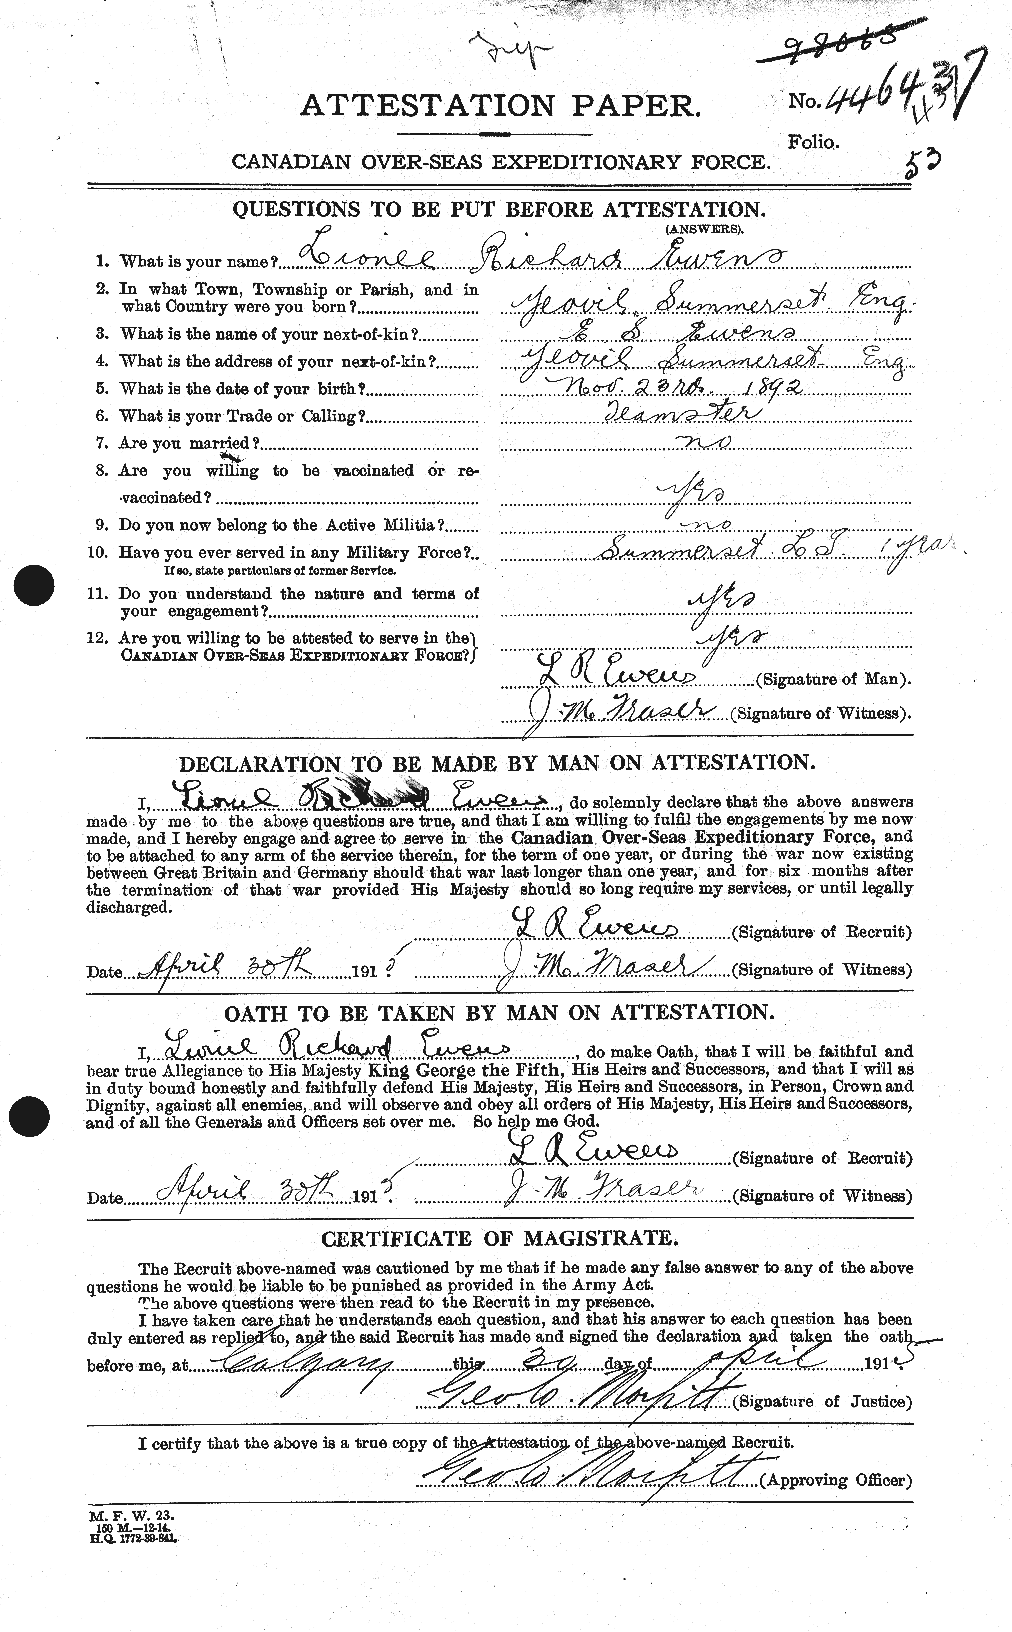 Personnel Records of the First World War - CEF 316205a